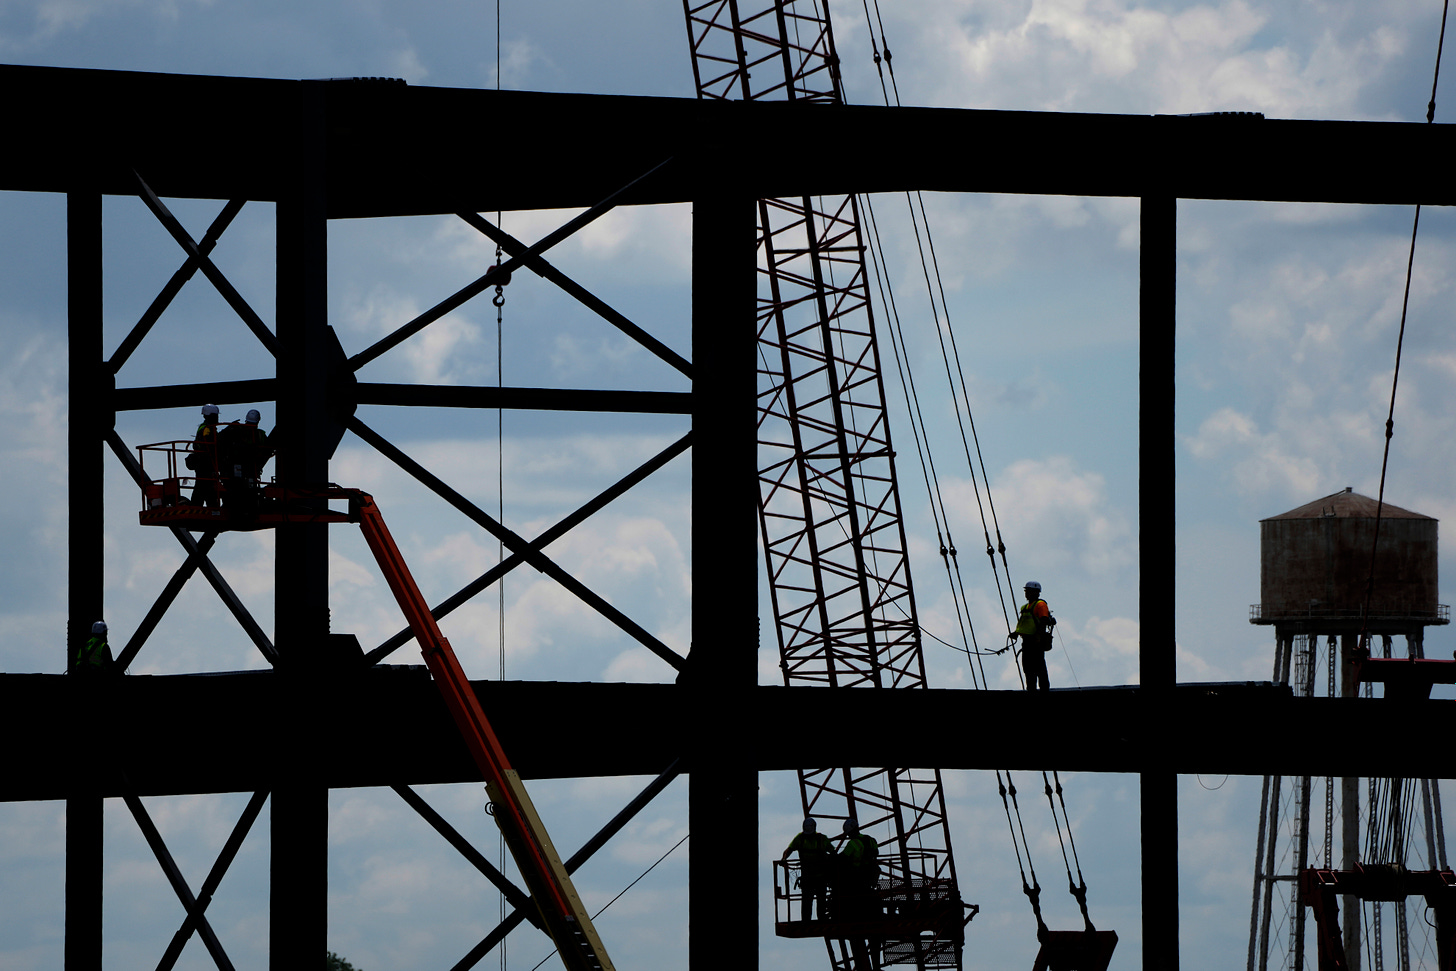 Iron workers construct the frame of a Panasonic electric vehicle battery plant in 2023 near DeSoto, Kansas.